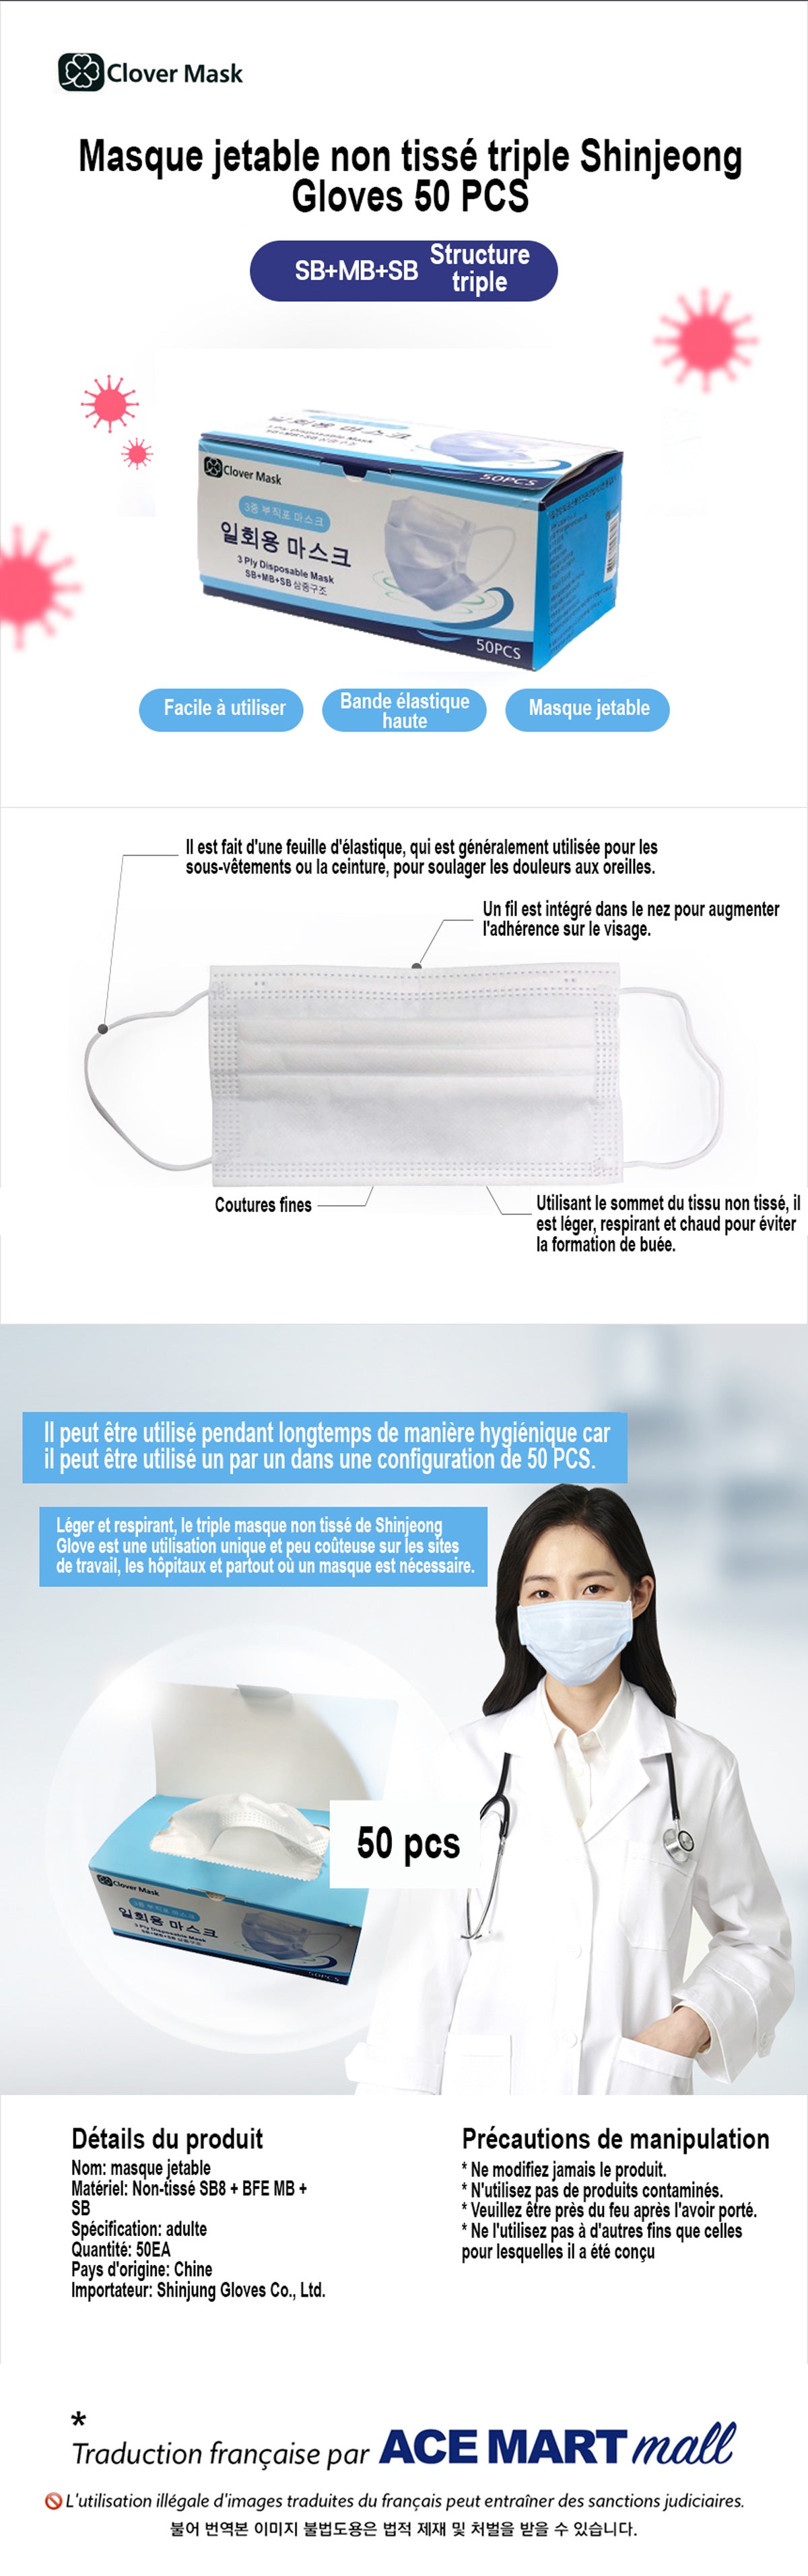 CLOVER MASK 3 PLY DISPOSABLE MASK